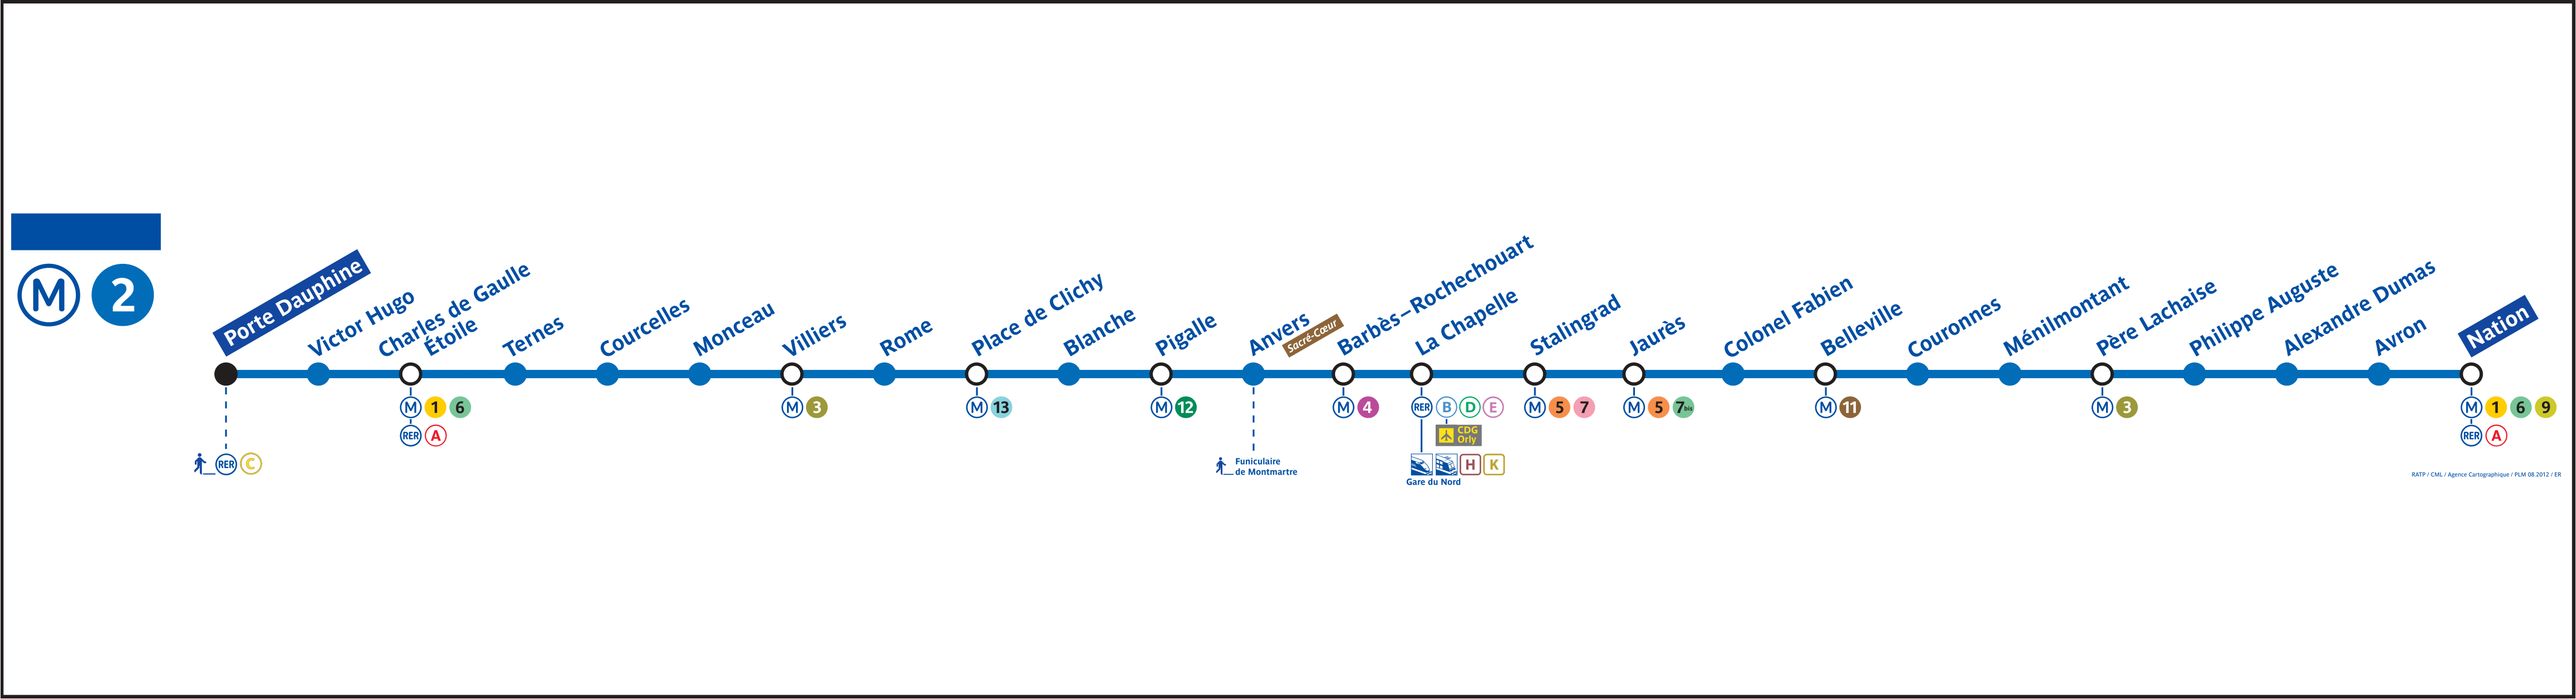 Timetable first and last metro line 2 Paris - Night Fox Tips